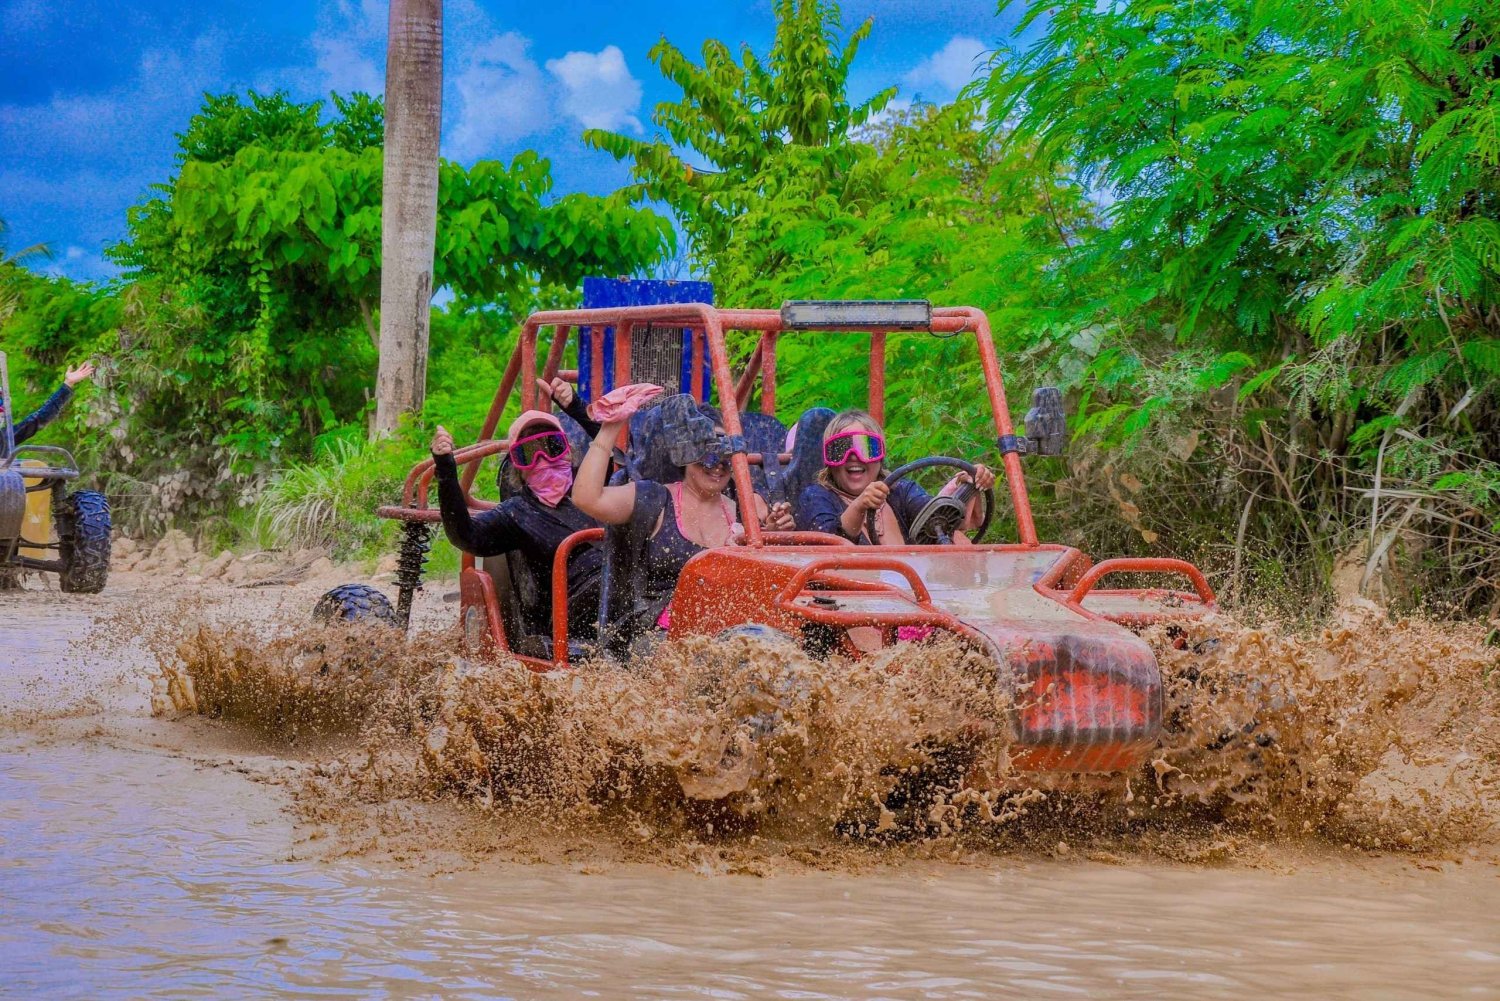 Buggy Adventure Tour with Chocolate and Coffee in Punta Cana